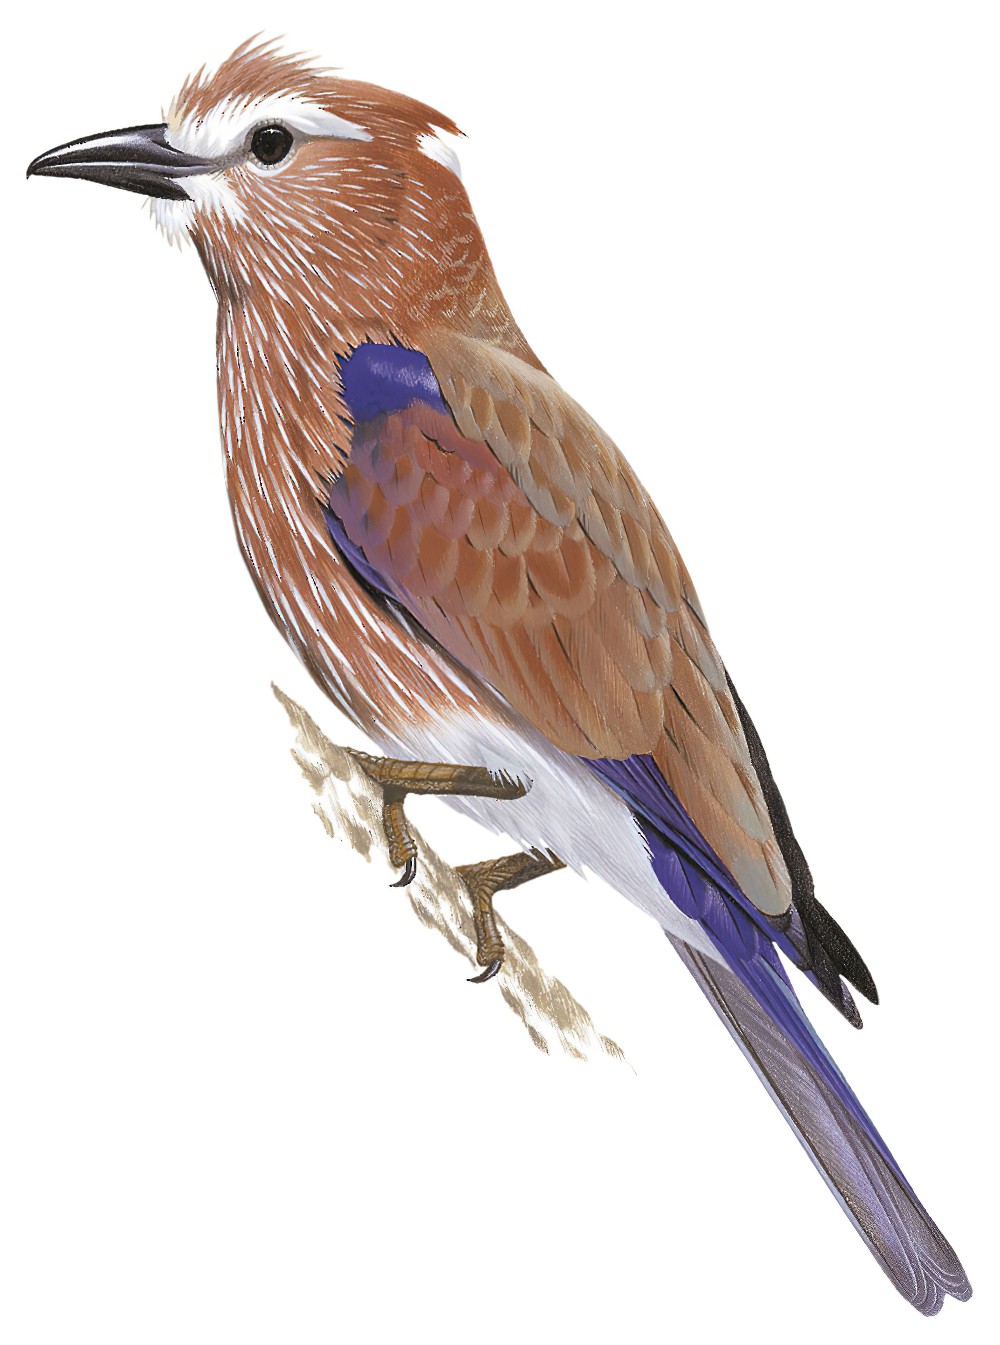 Rufous-crowned Roller / Coracias naevius